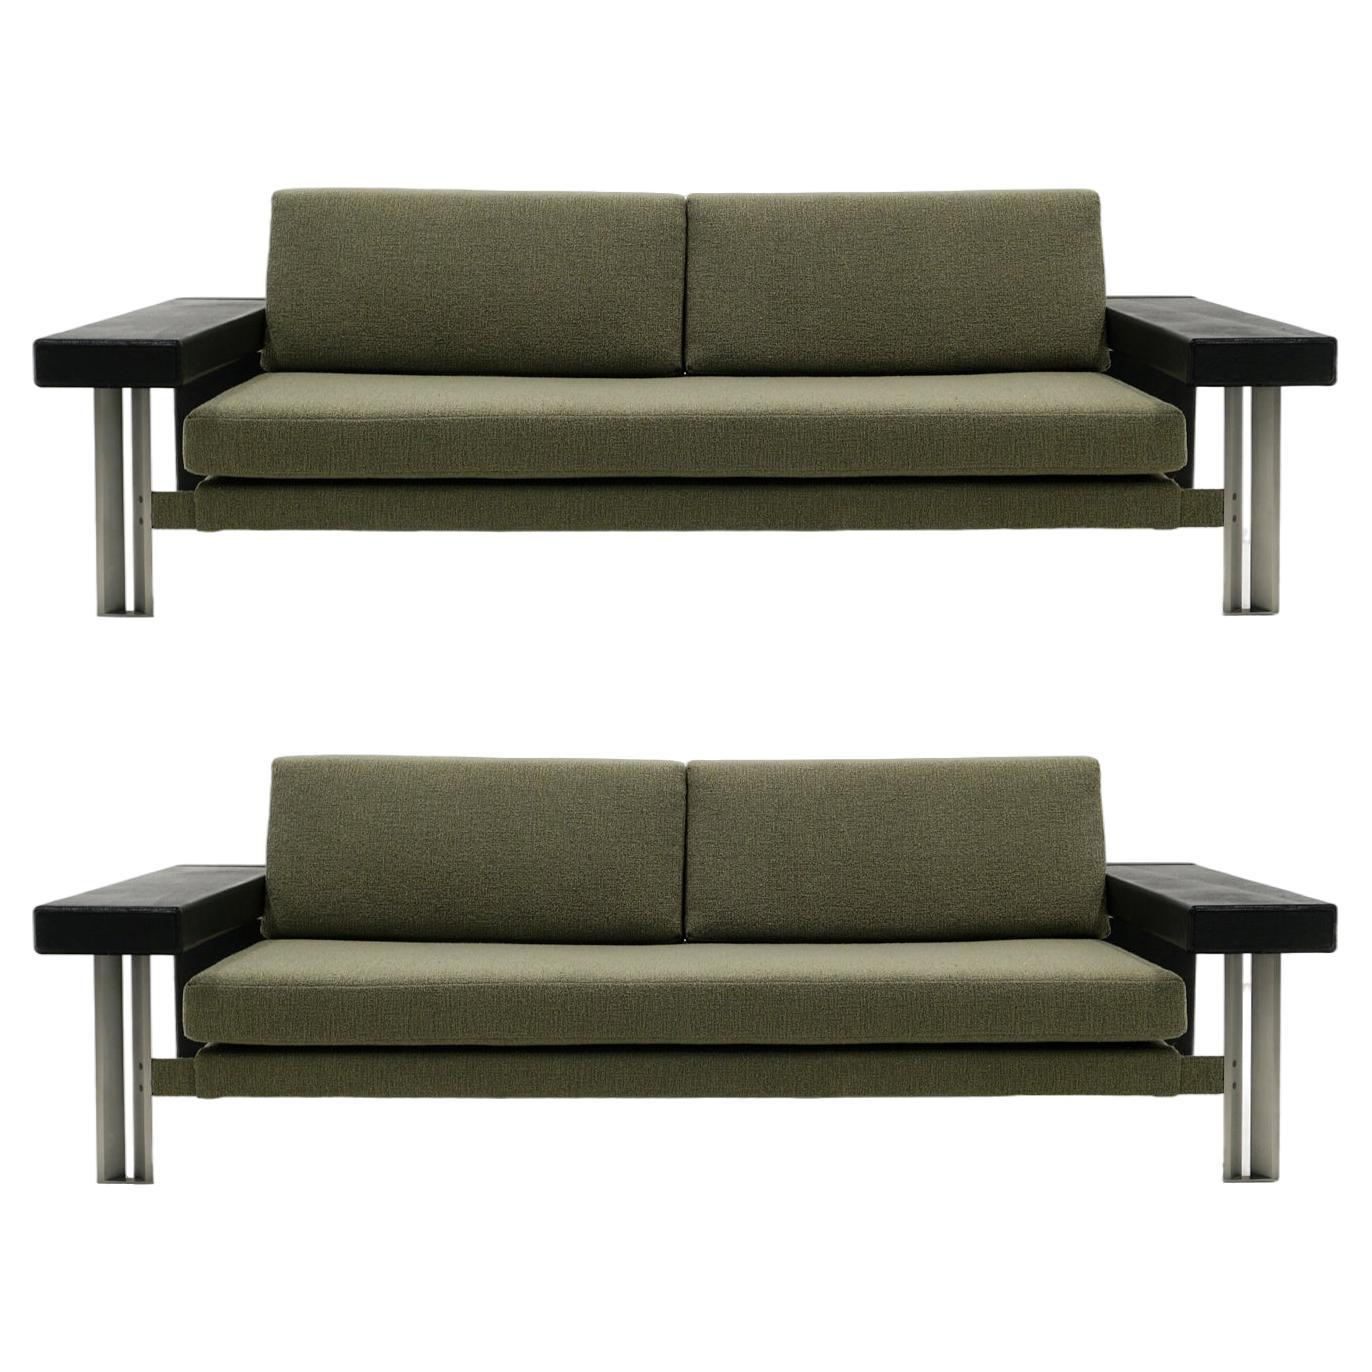 Pair of Sofas by Giovanni Offredi for Saporiti, Italy, 1970s.  Ready to Use. For Sale